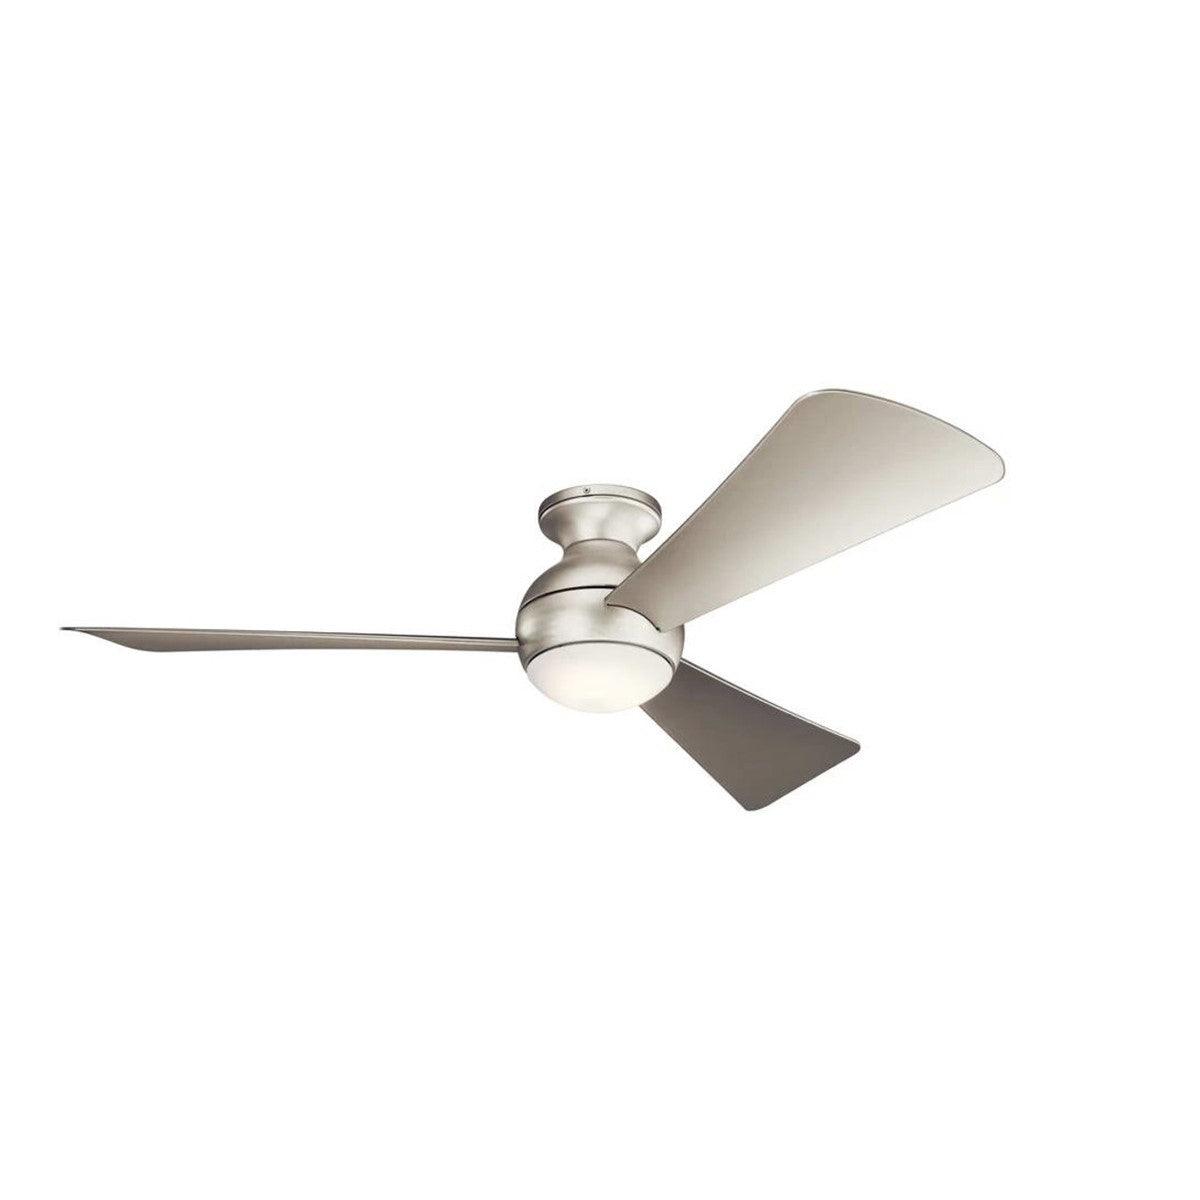 Sola 54 Inch Propeller Outdoor Ceiling Fan With Light, Wall Control Included - Bees Lighting